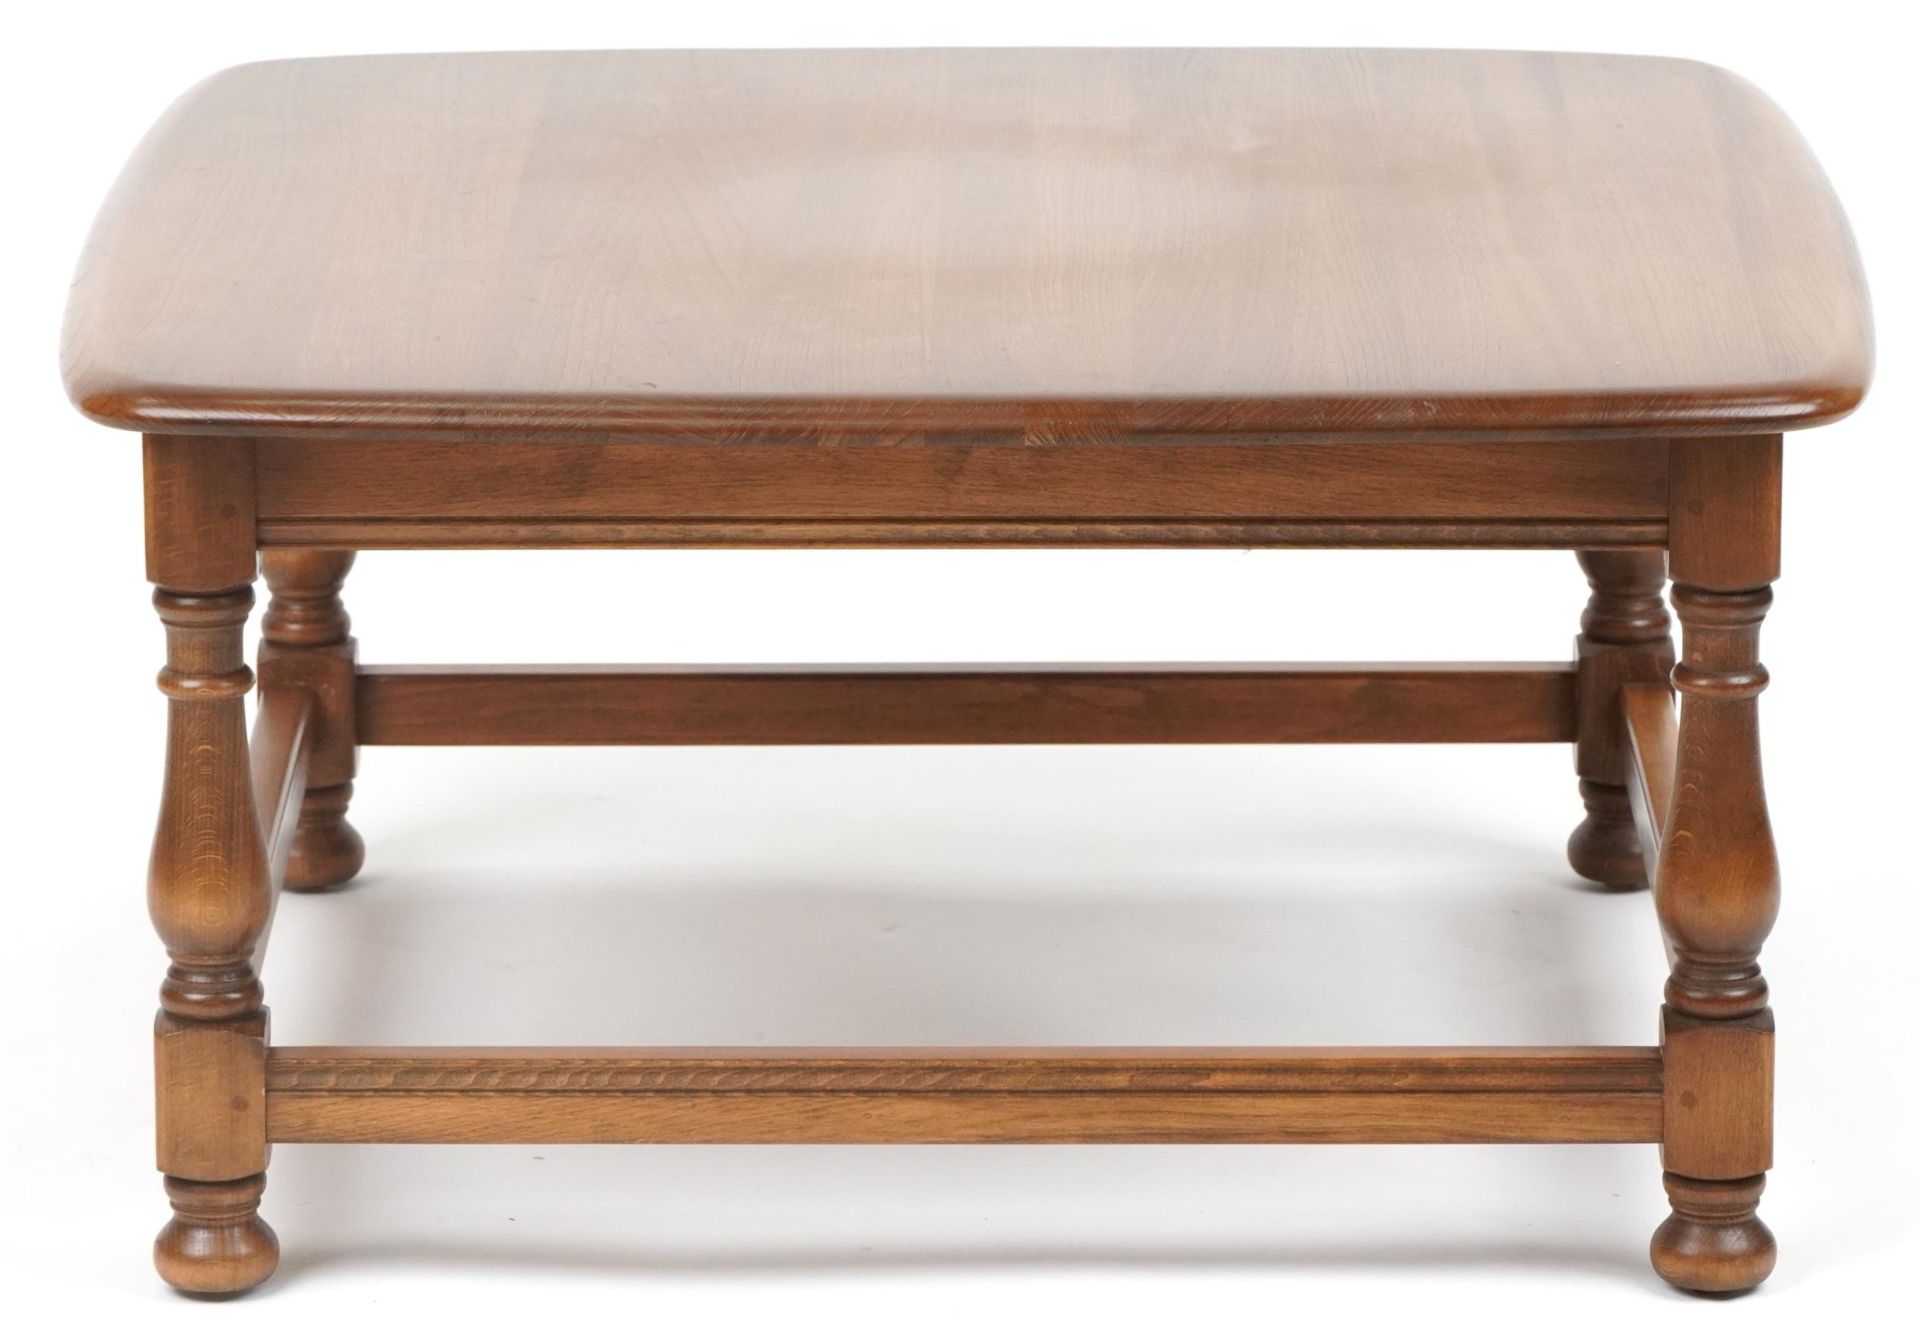 Ercol elm coffee table with square top, 38cm high x 75cm square - Image 2 of 5